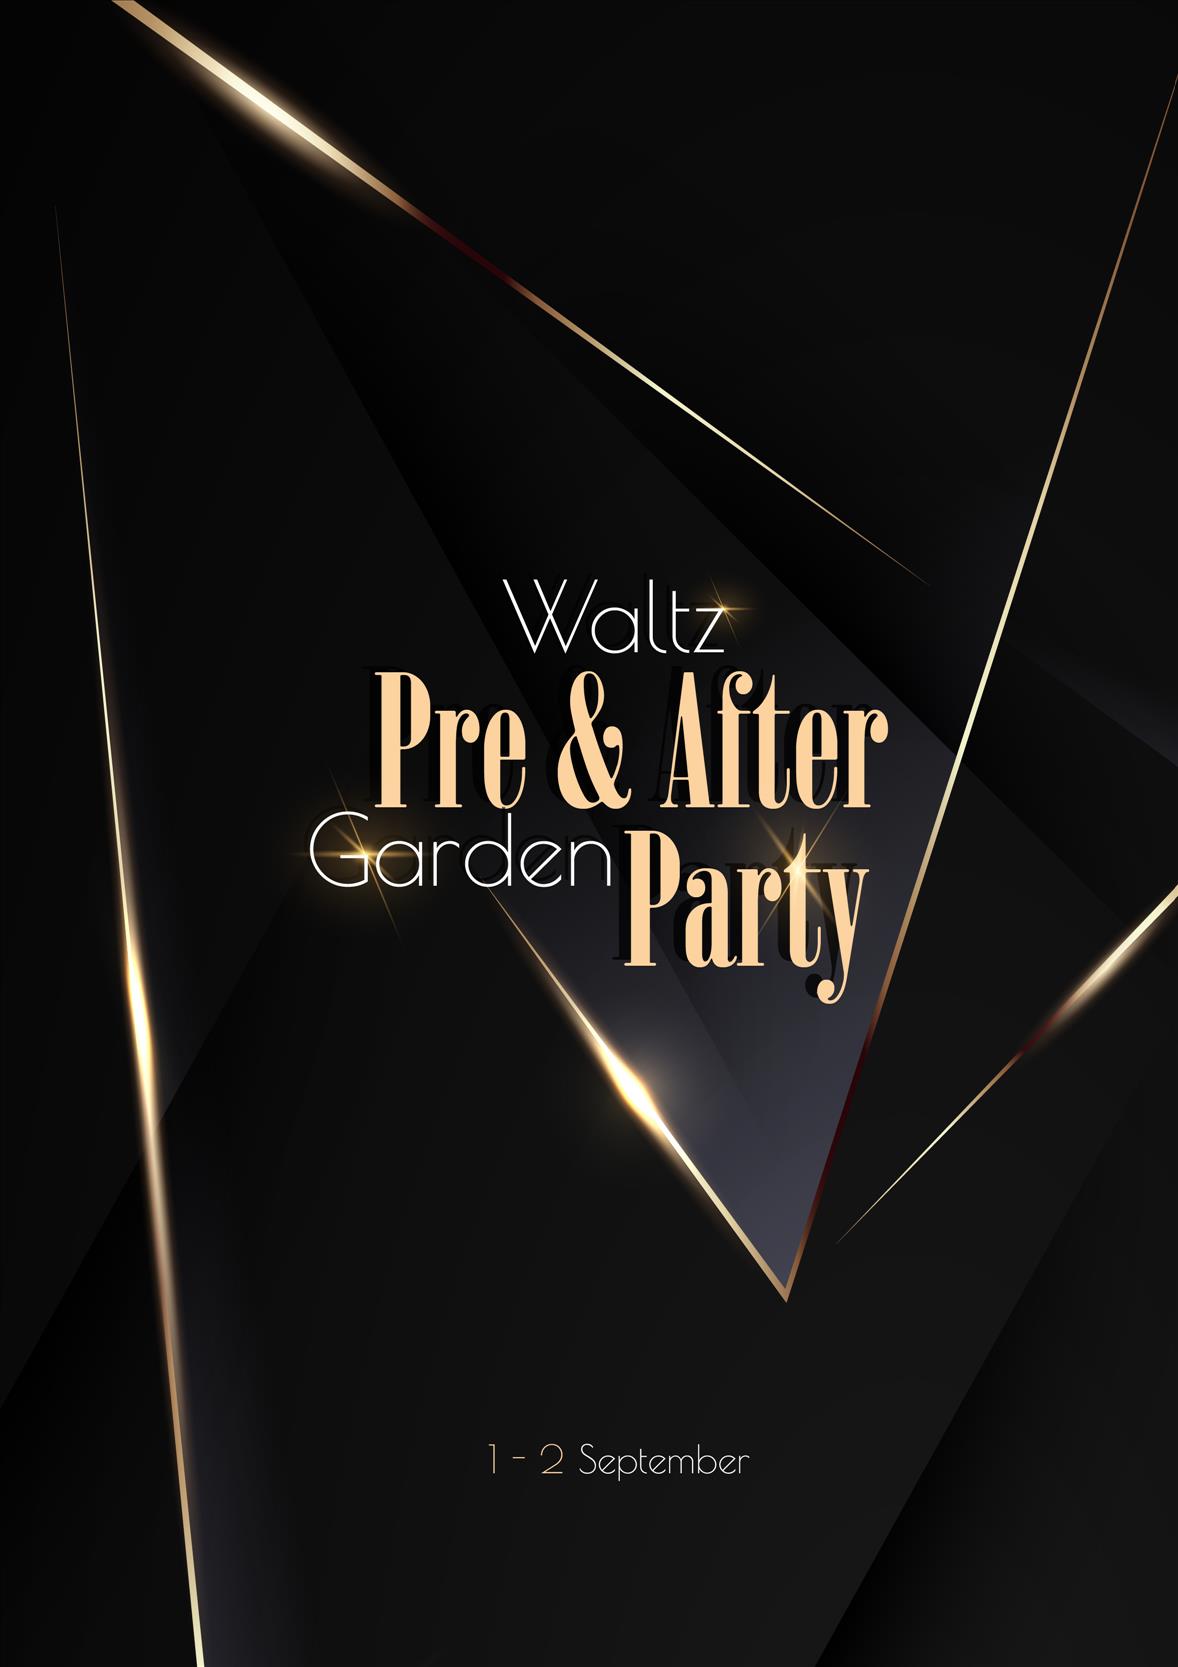 Waltz Pre & After Garden Party poster